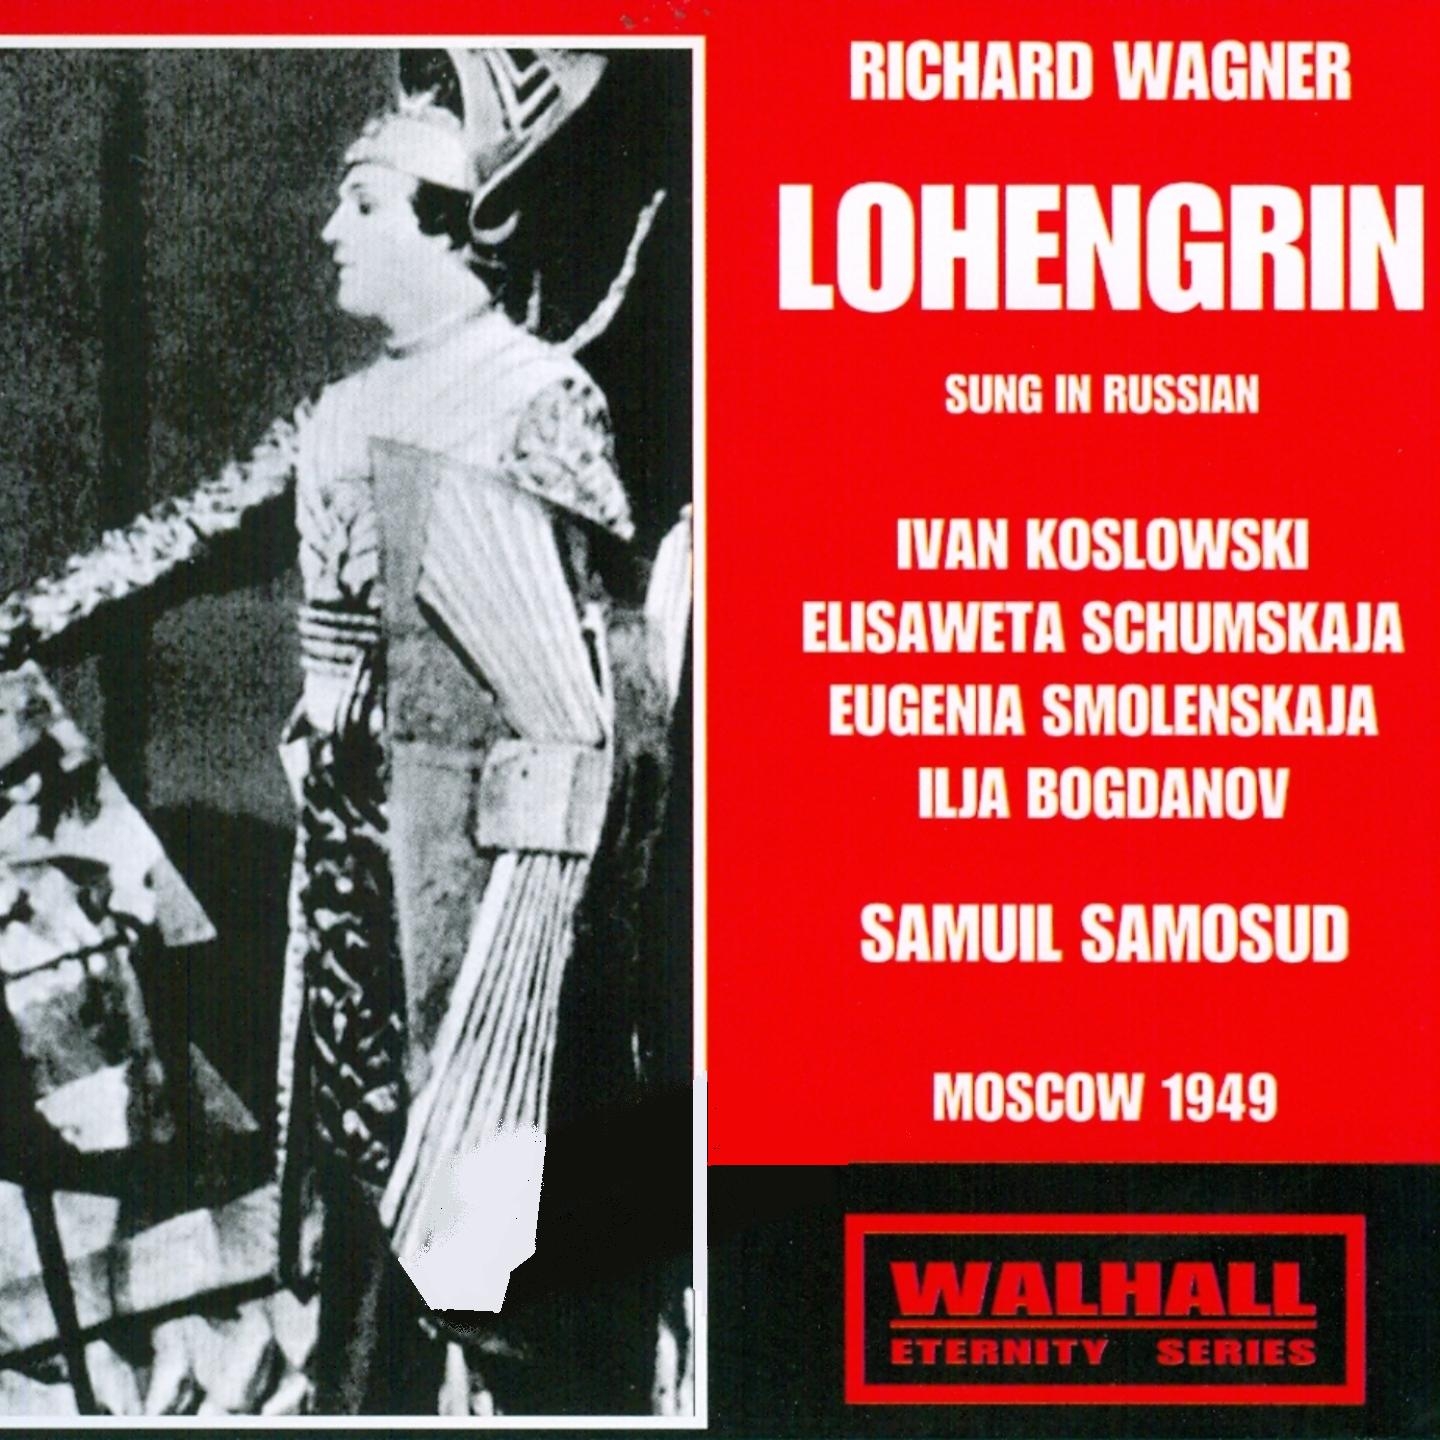 Richard Wagner: Lohengrin (Moscow 1949) (Sung In Russian)